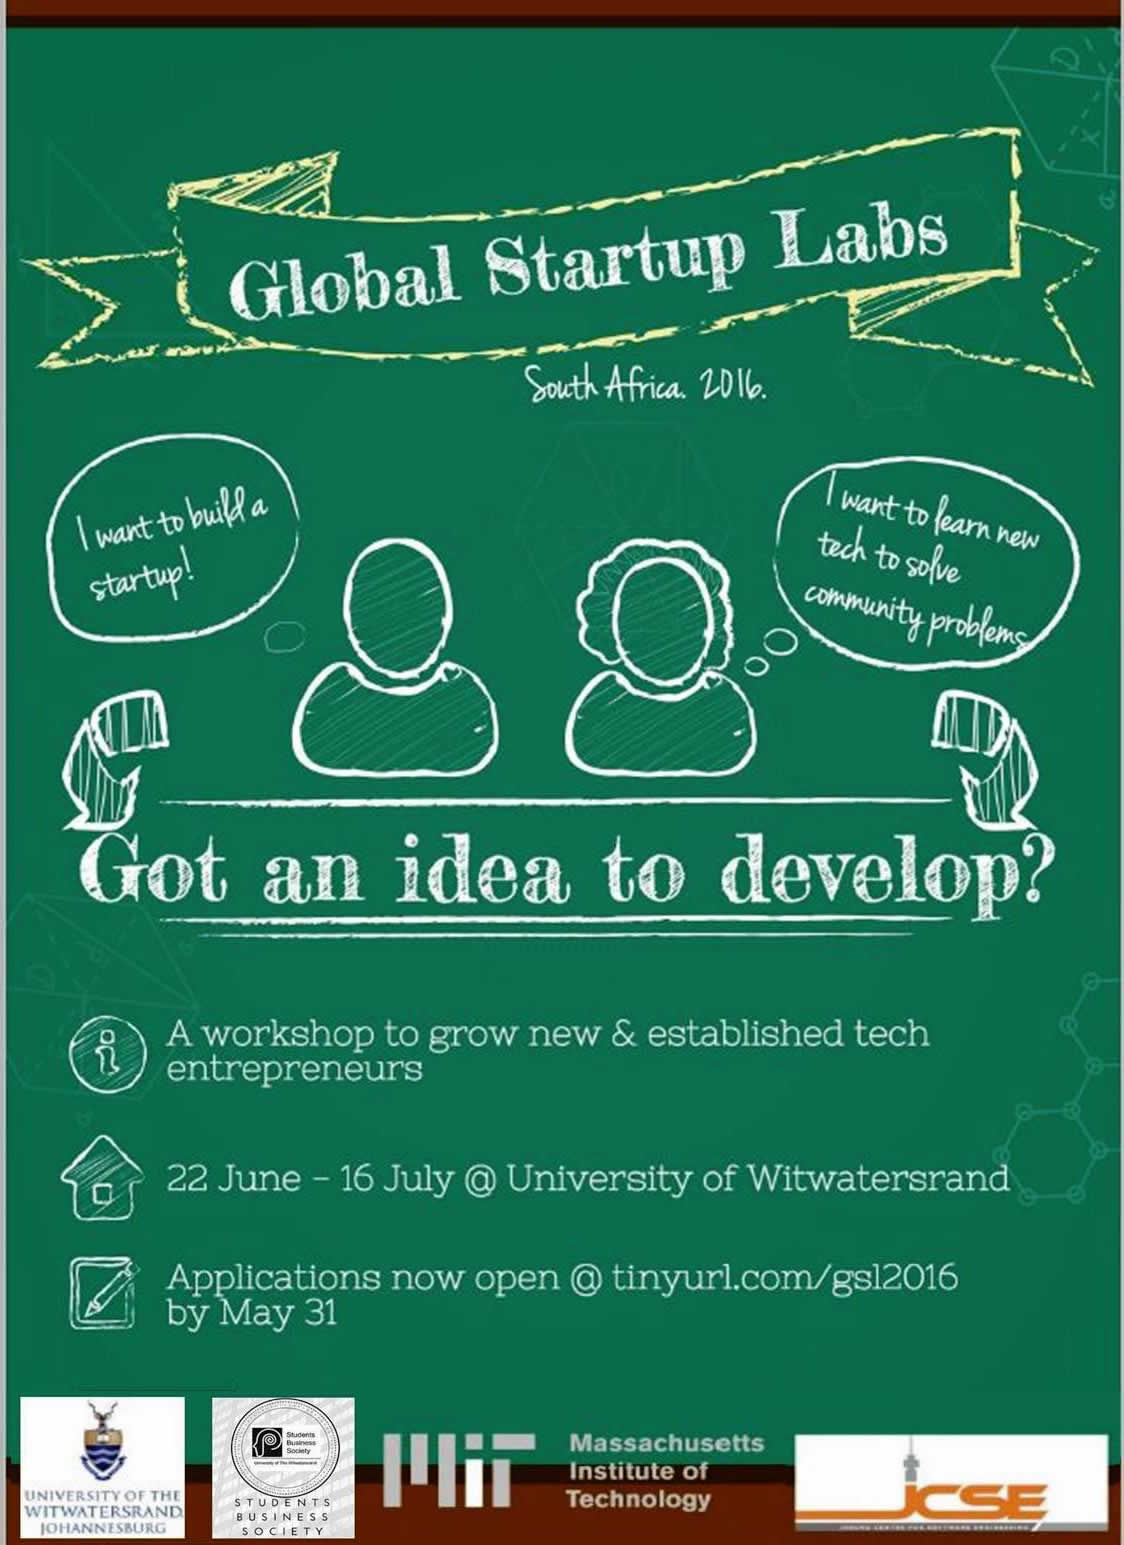 Applications now open for MIT Global Startup Labs